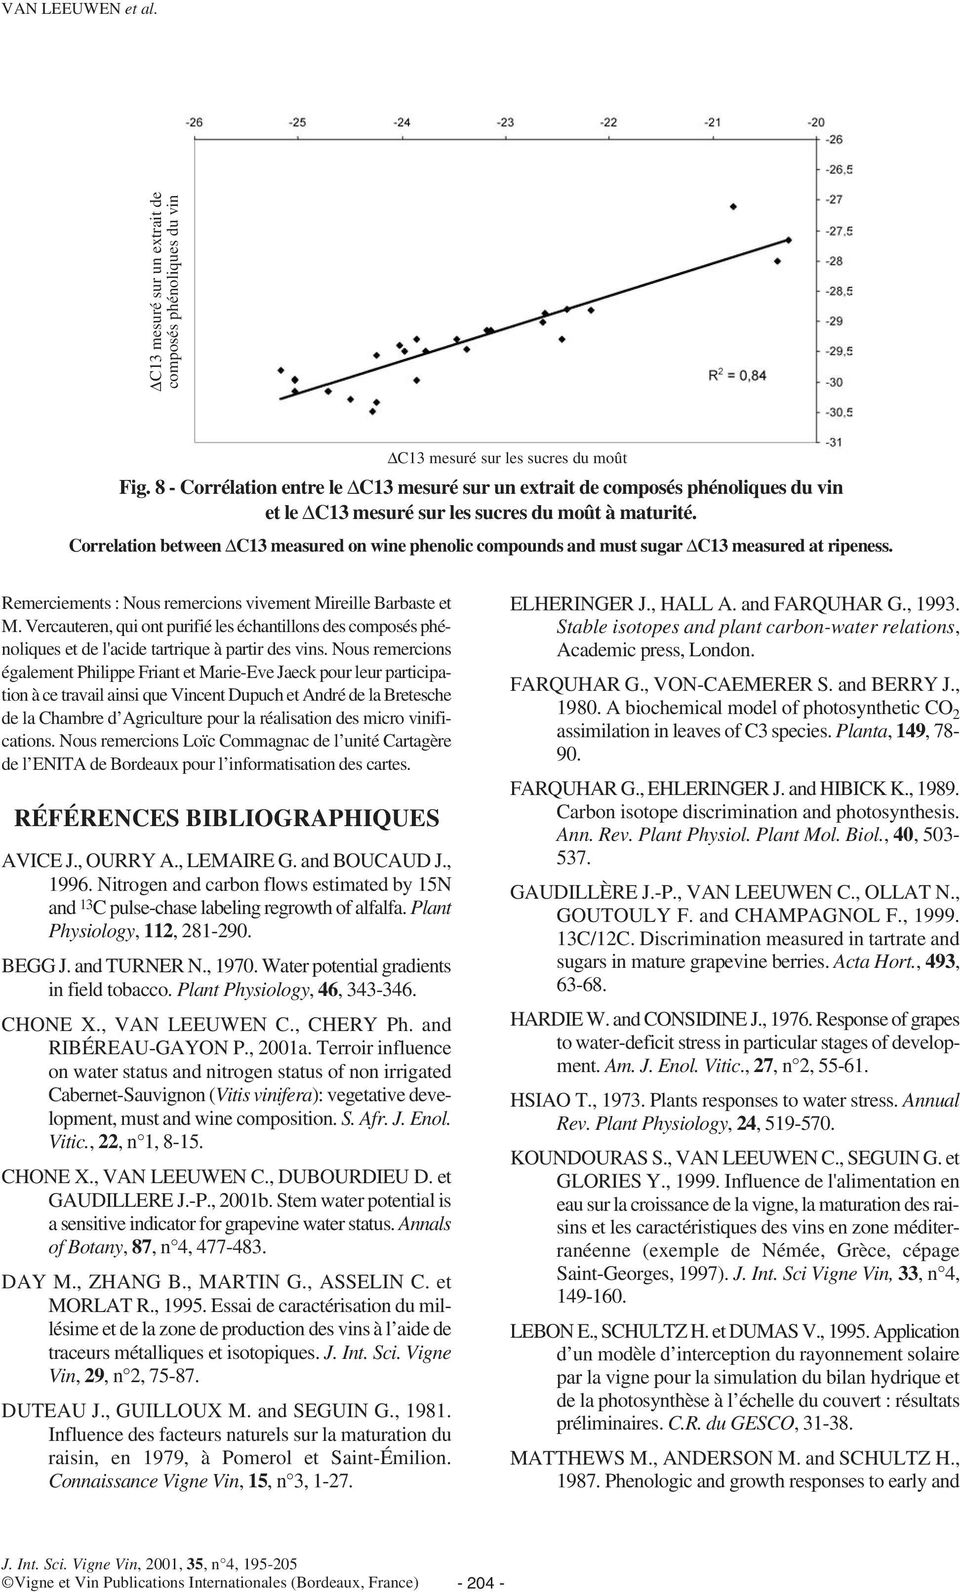 Correlation between C13 measured on wine phenolic compounds and must sugar C13 measured at ripeness. Remerciements : Nous remercions vivement Mireille Barbaste et M.